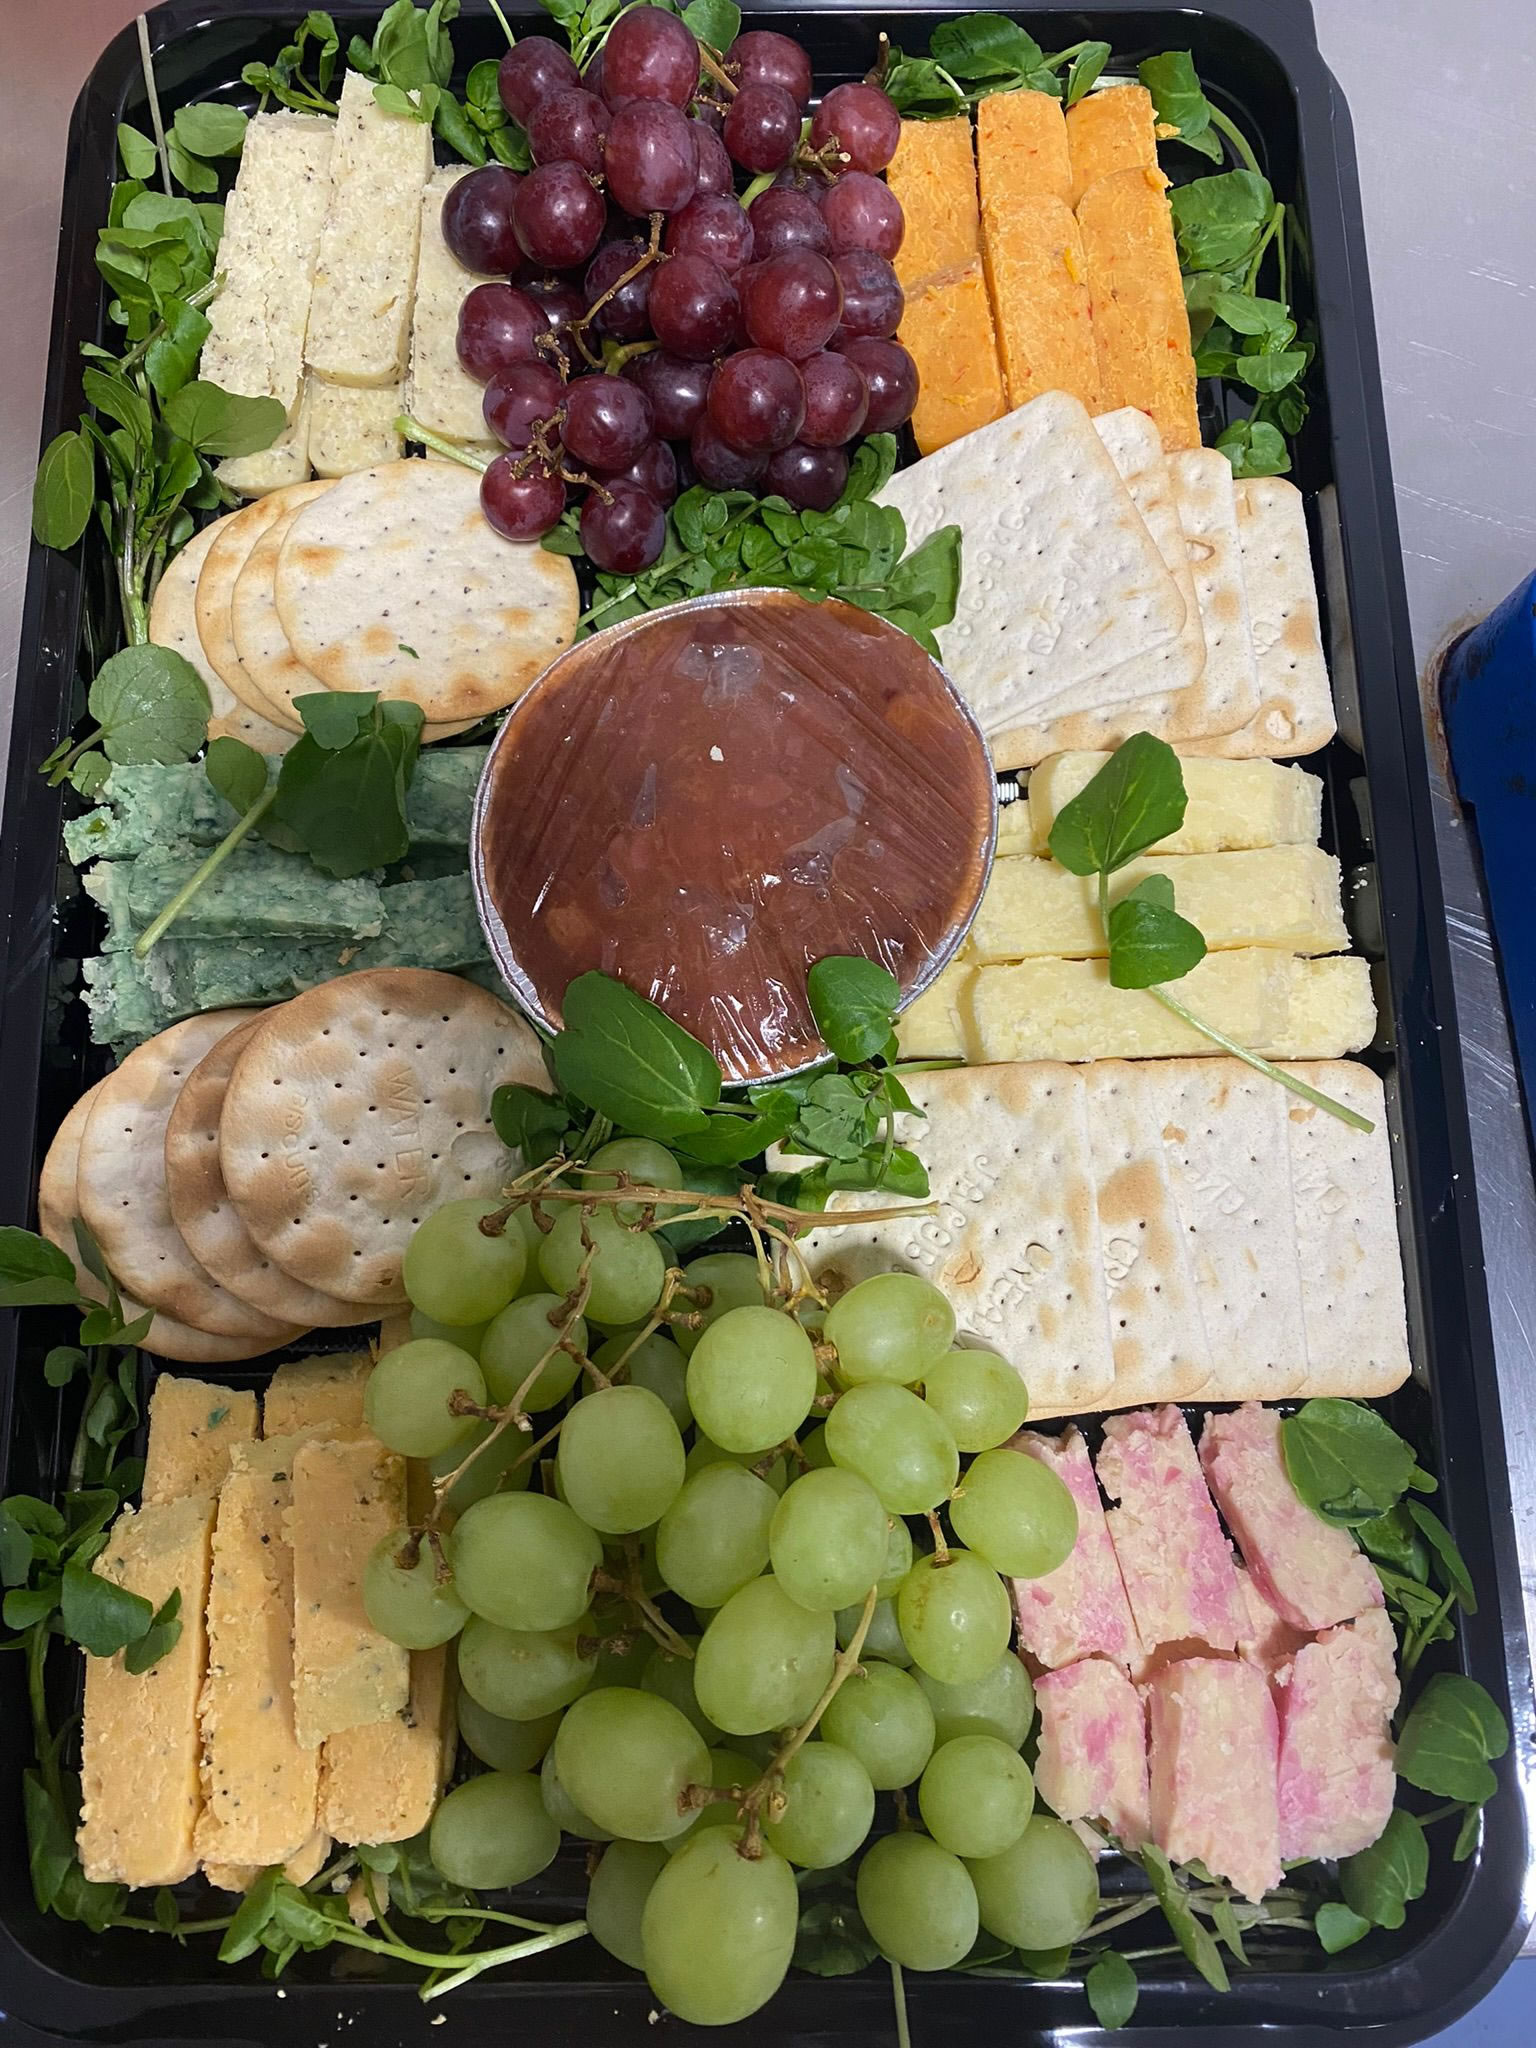 Assorted Cheese Board by Ellesmere Port Catering